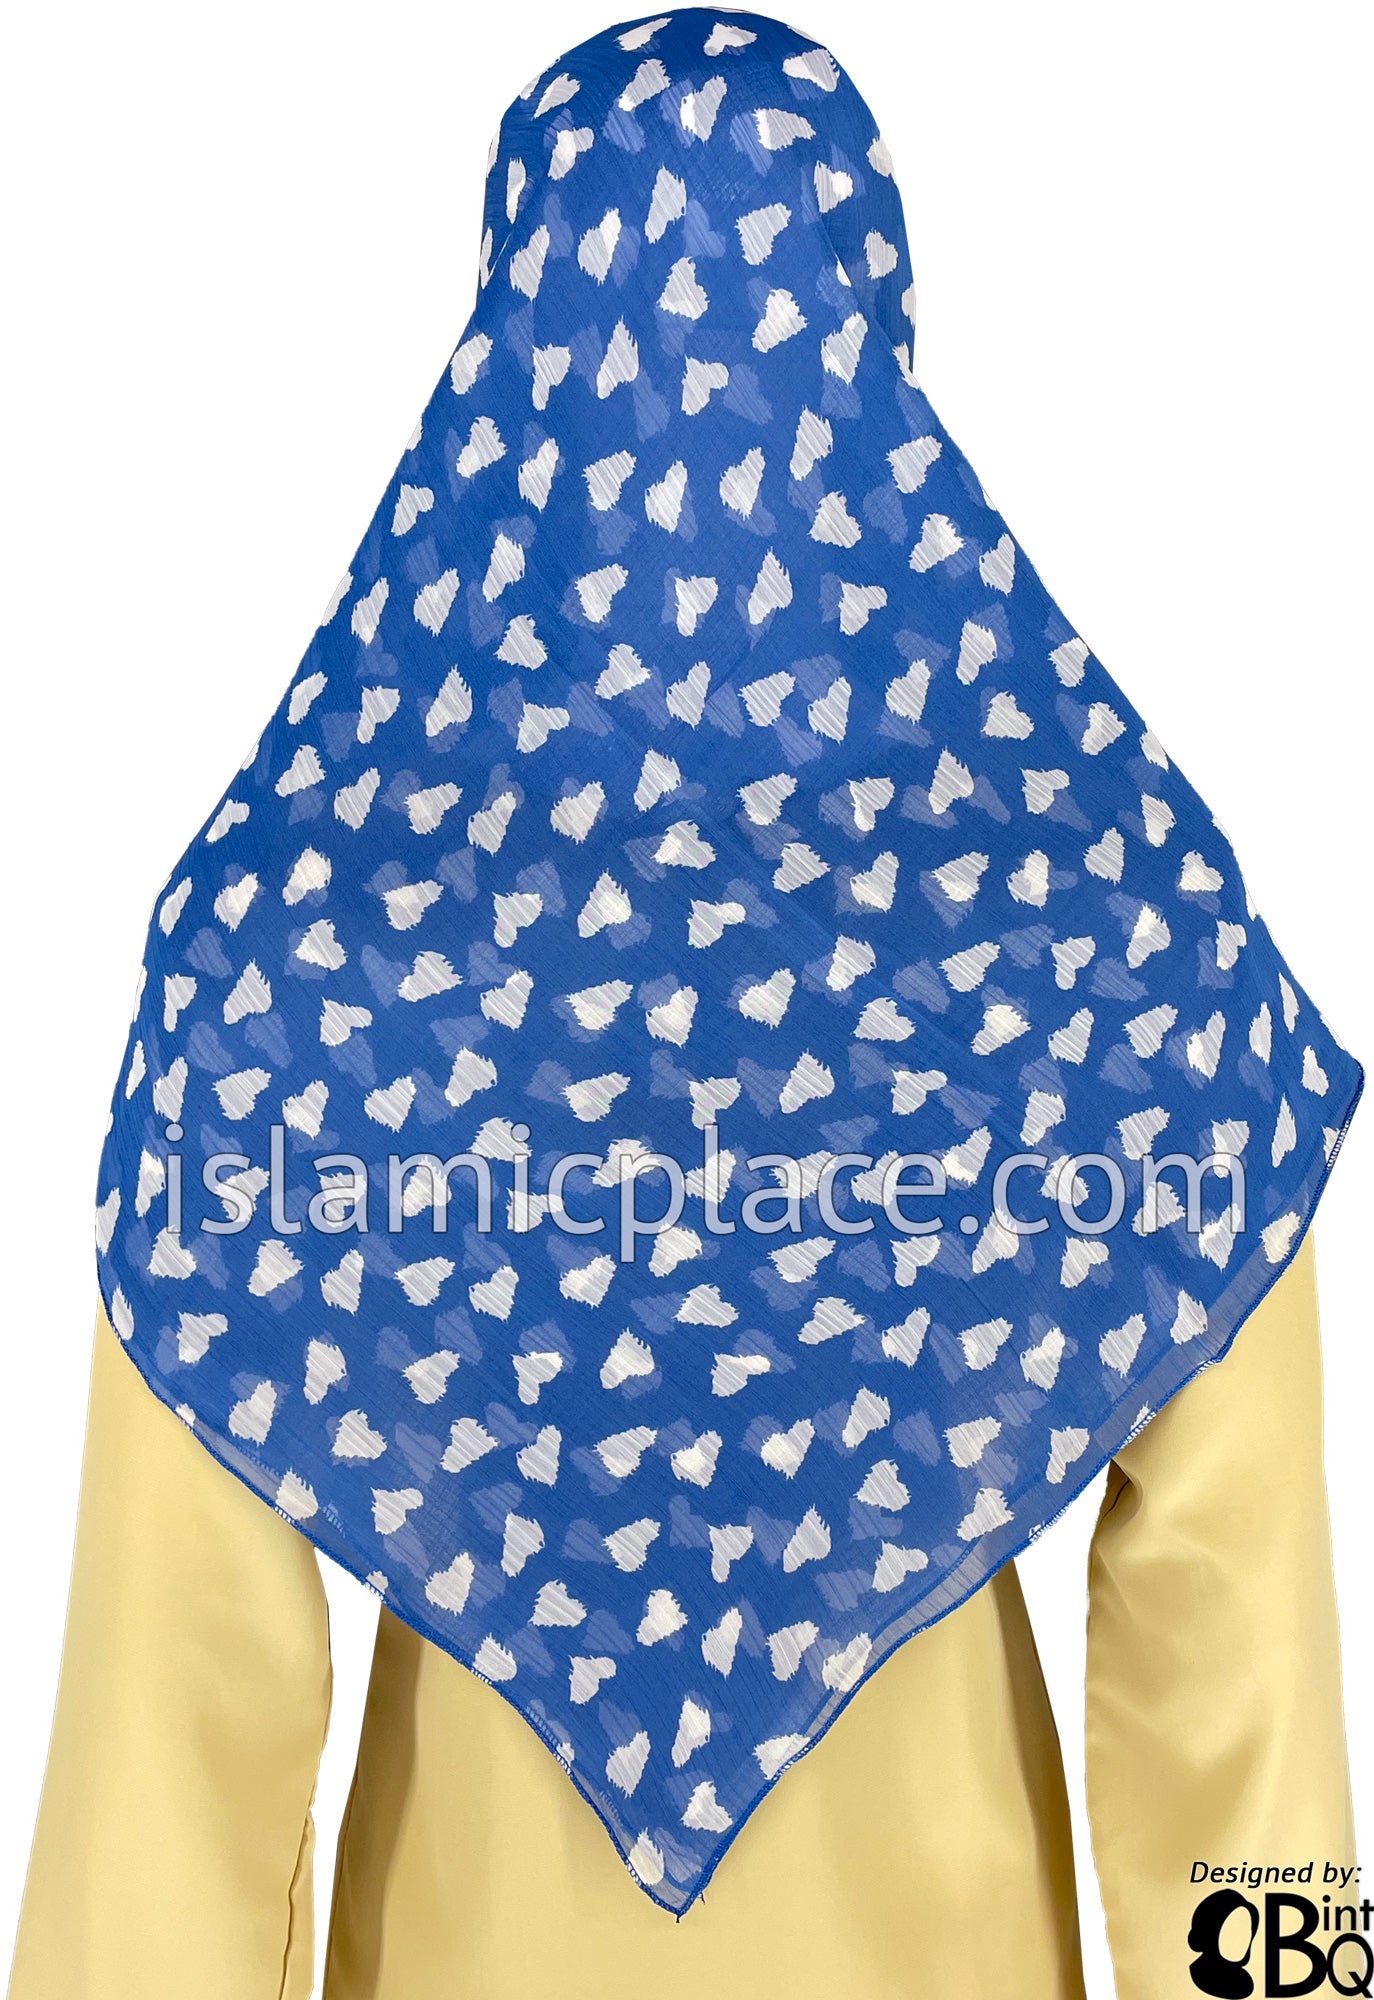 White Hearts on Amethyst Blue - 45" Square Printed Khimar